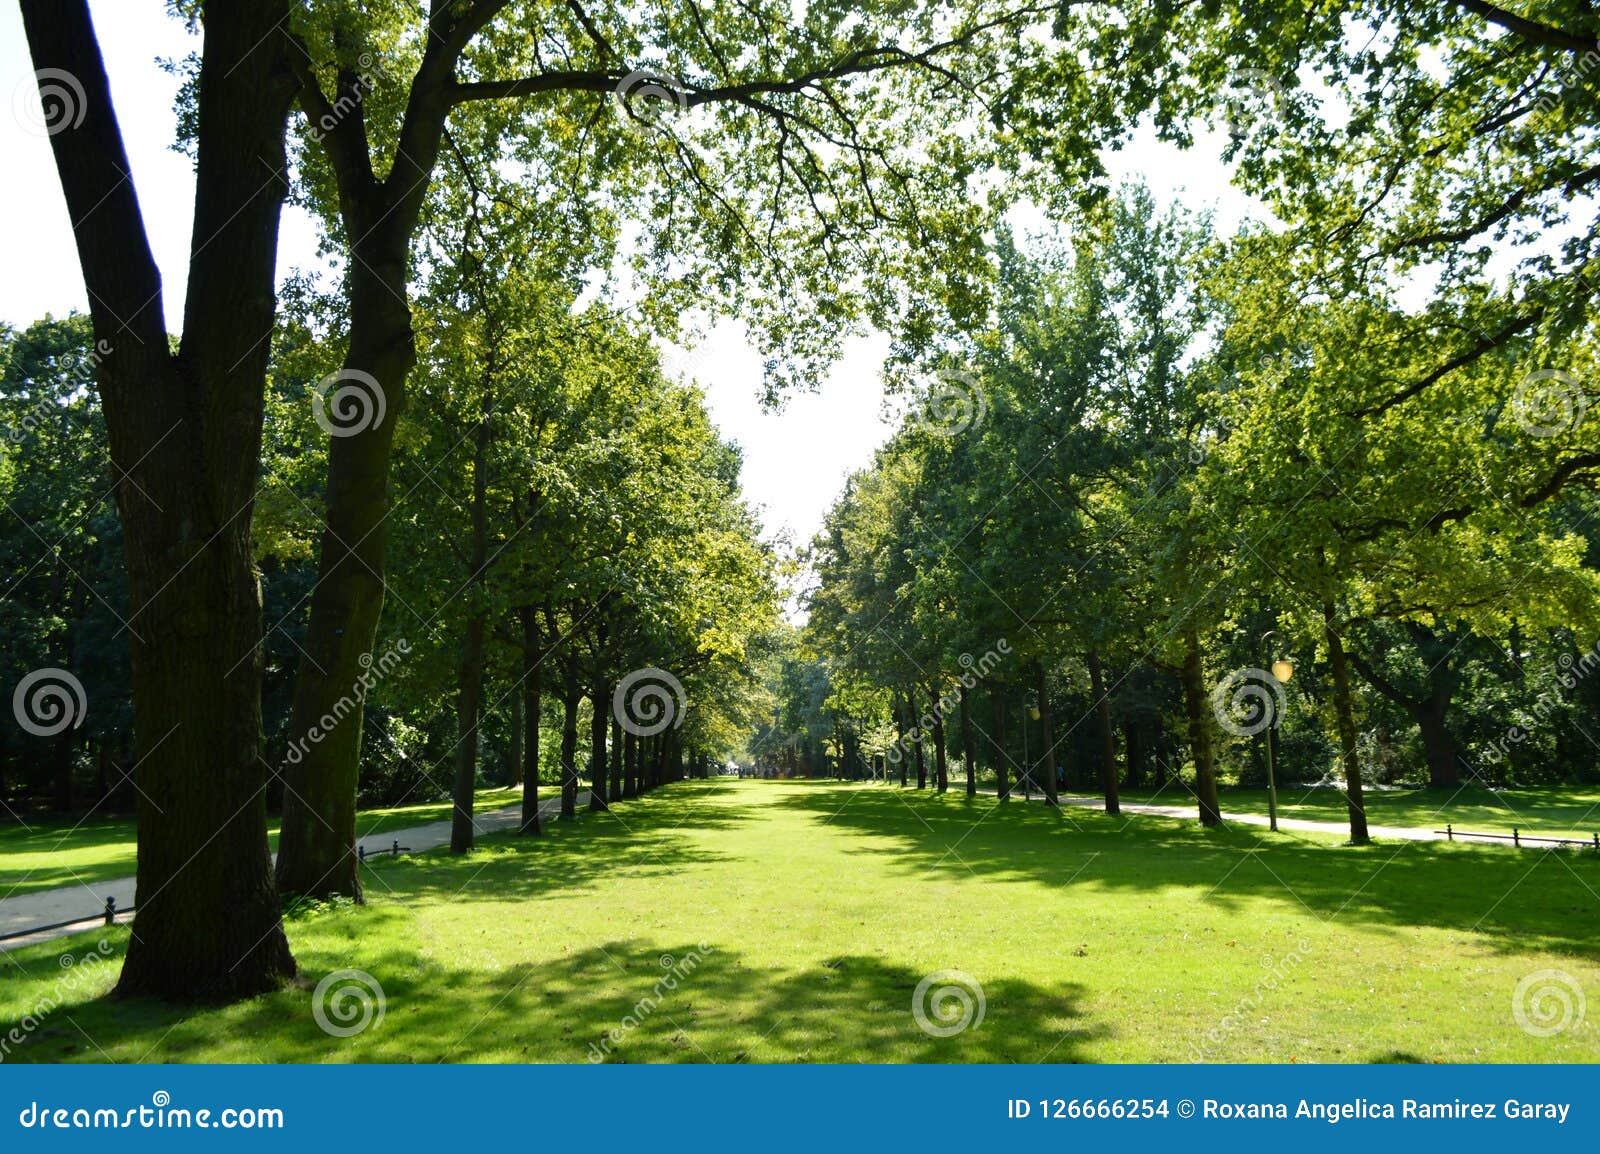 Trees Making a Heart One Day in the Park Stock Photo - Image of shape ...